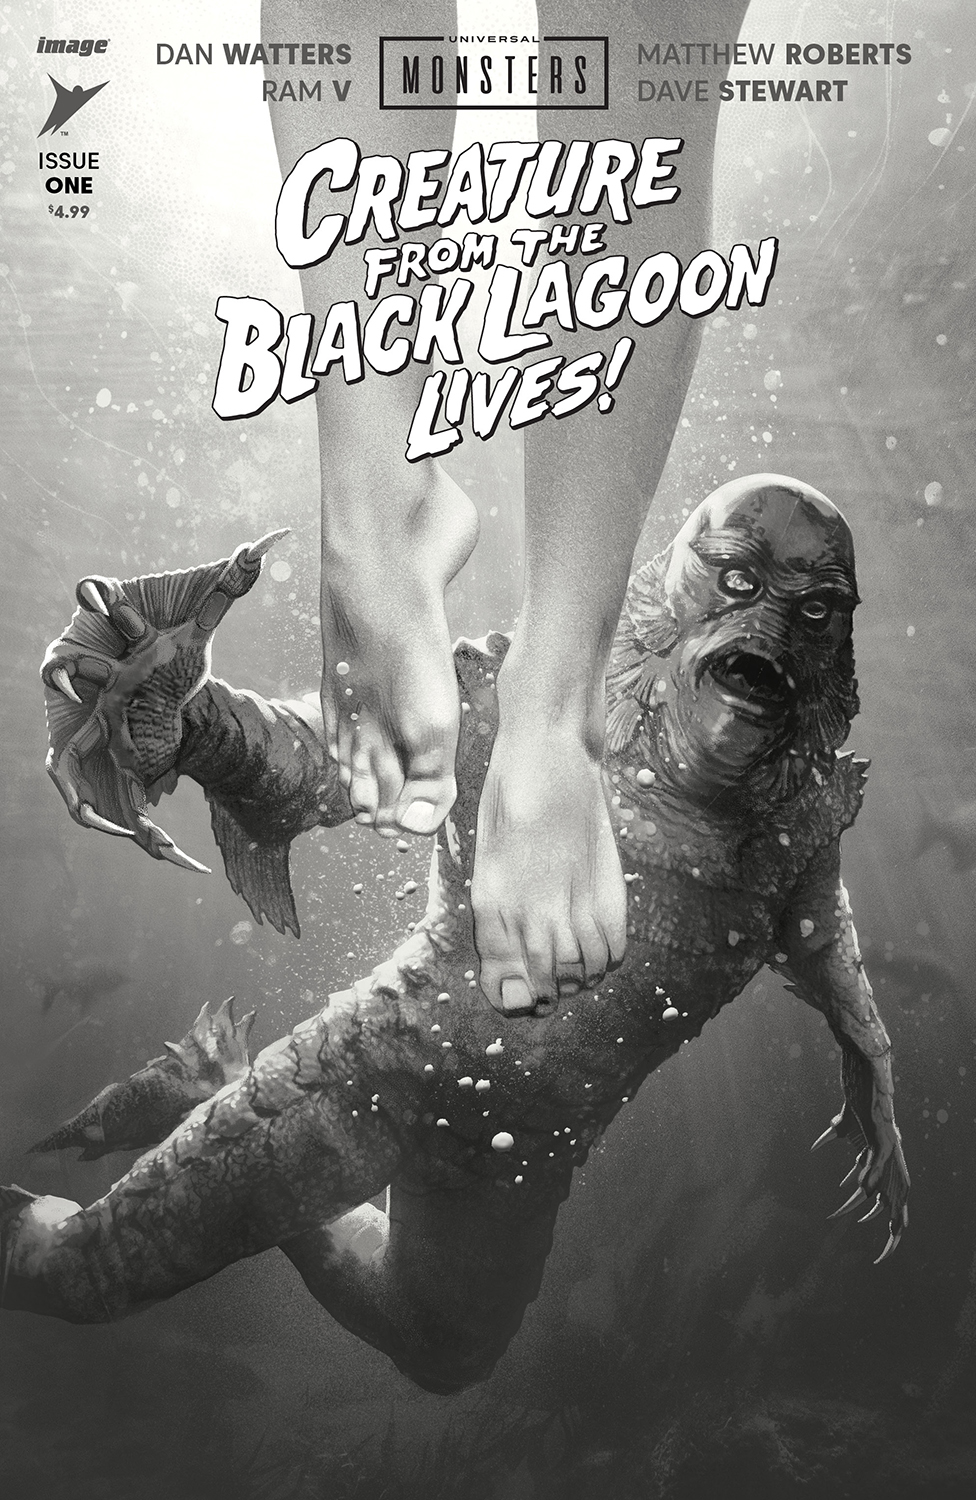 Universal Monsters the Creature from the Black Lagoon Lives #1 Cover D 1 for 25 Incentive Joshua Middle (Of 4)